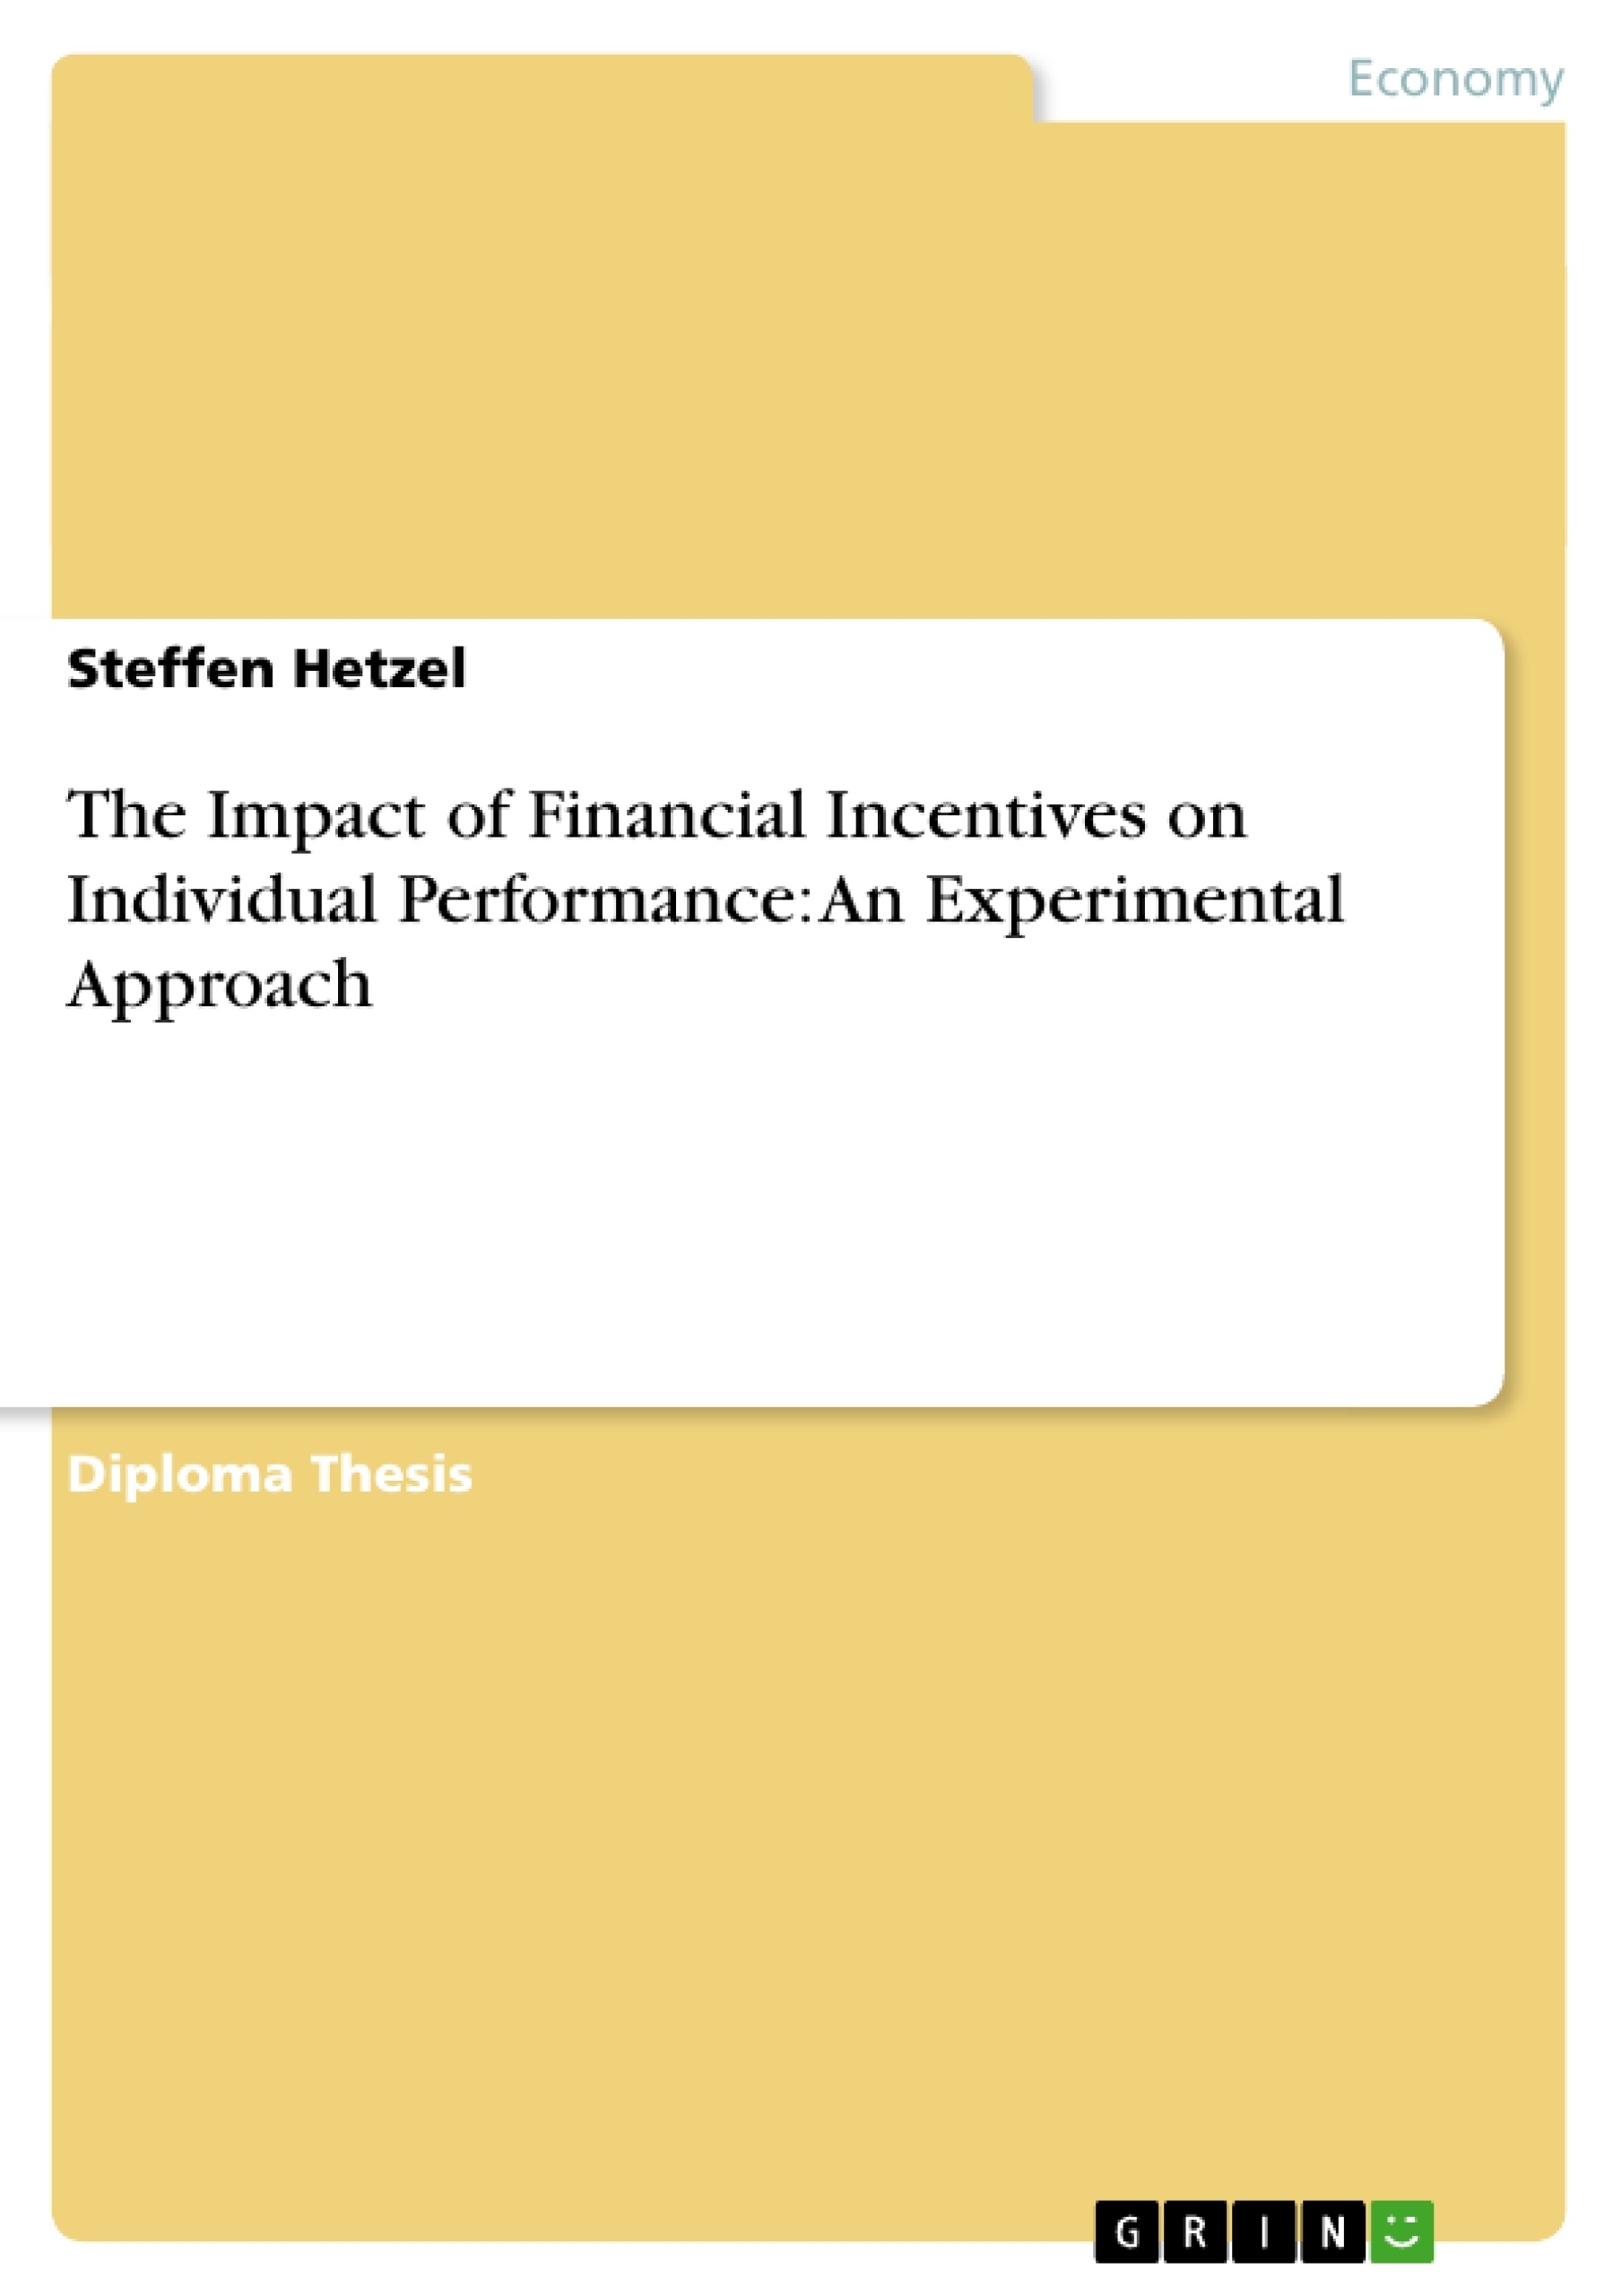 Título: The Impact of Financial Incentives on Individual Performance: An Experimental Approach 